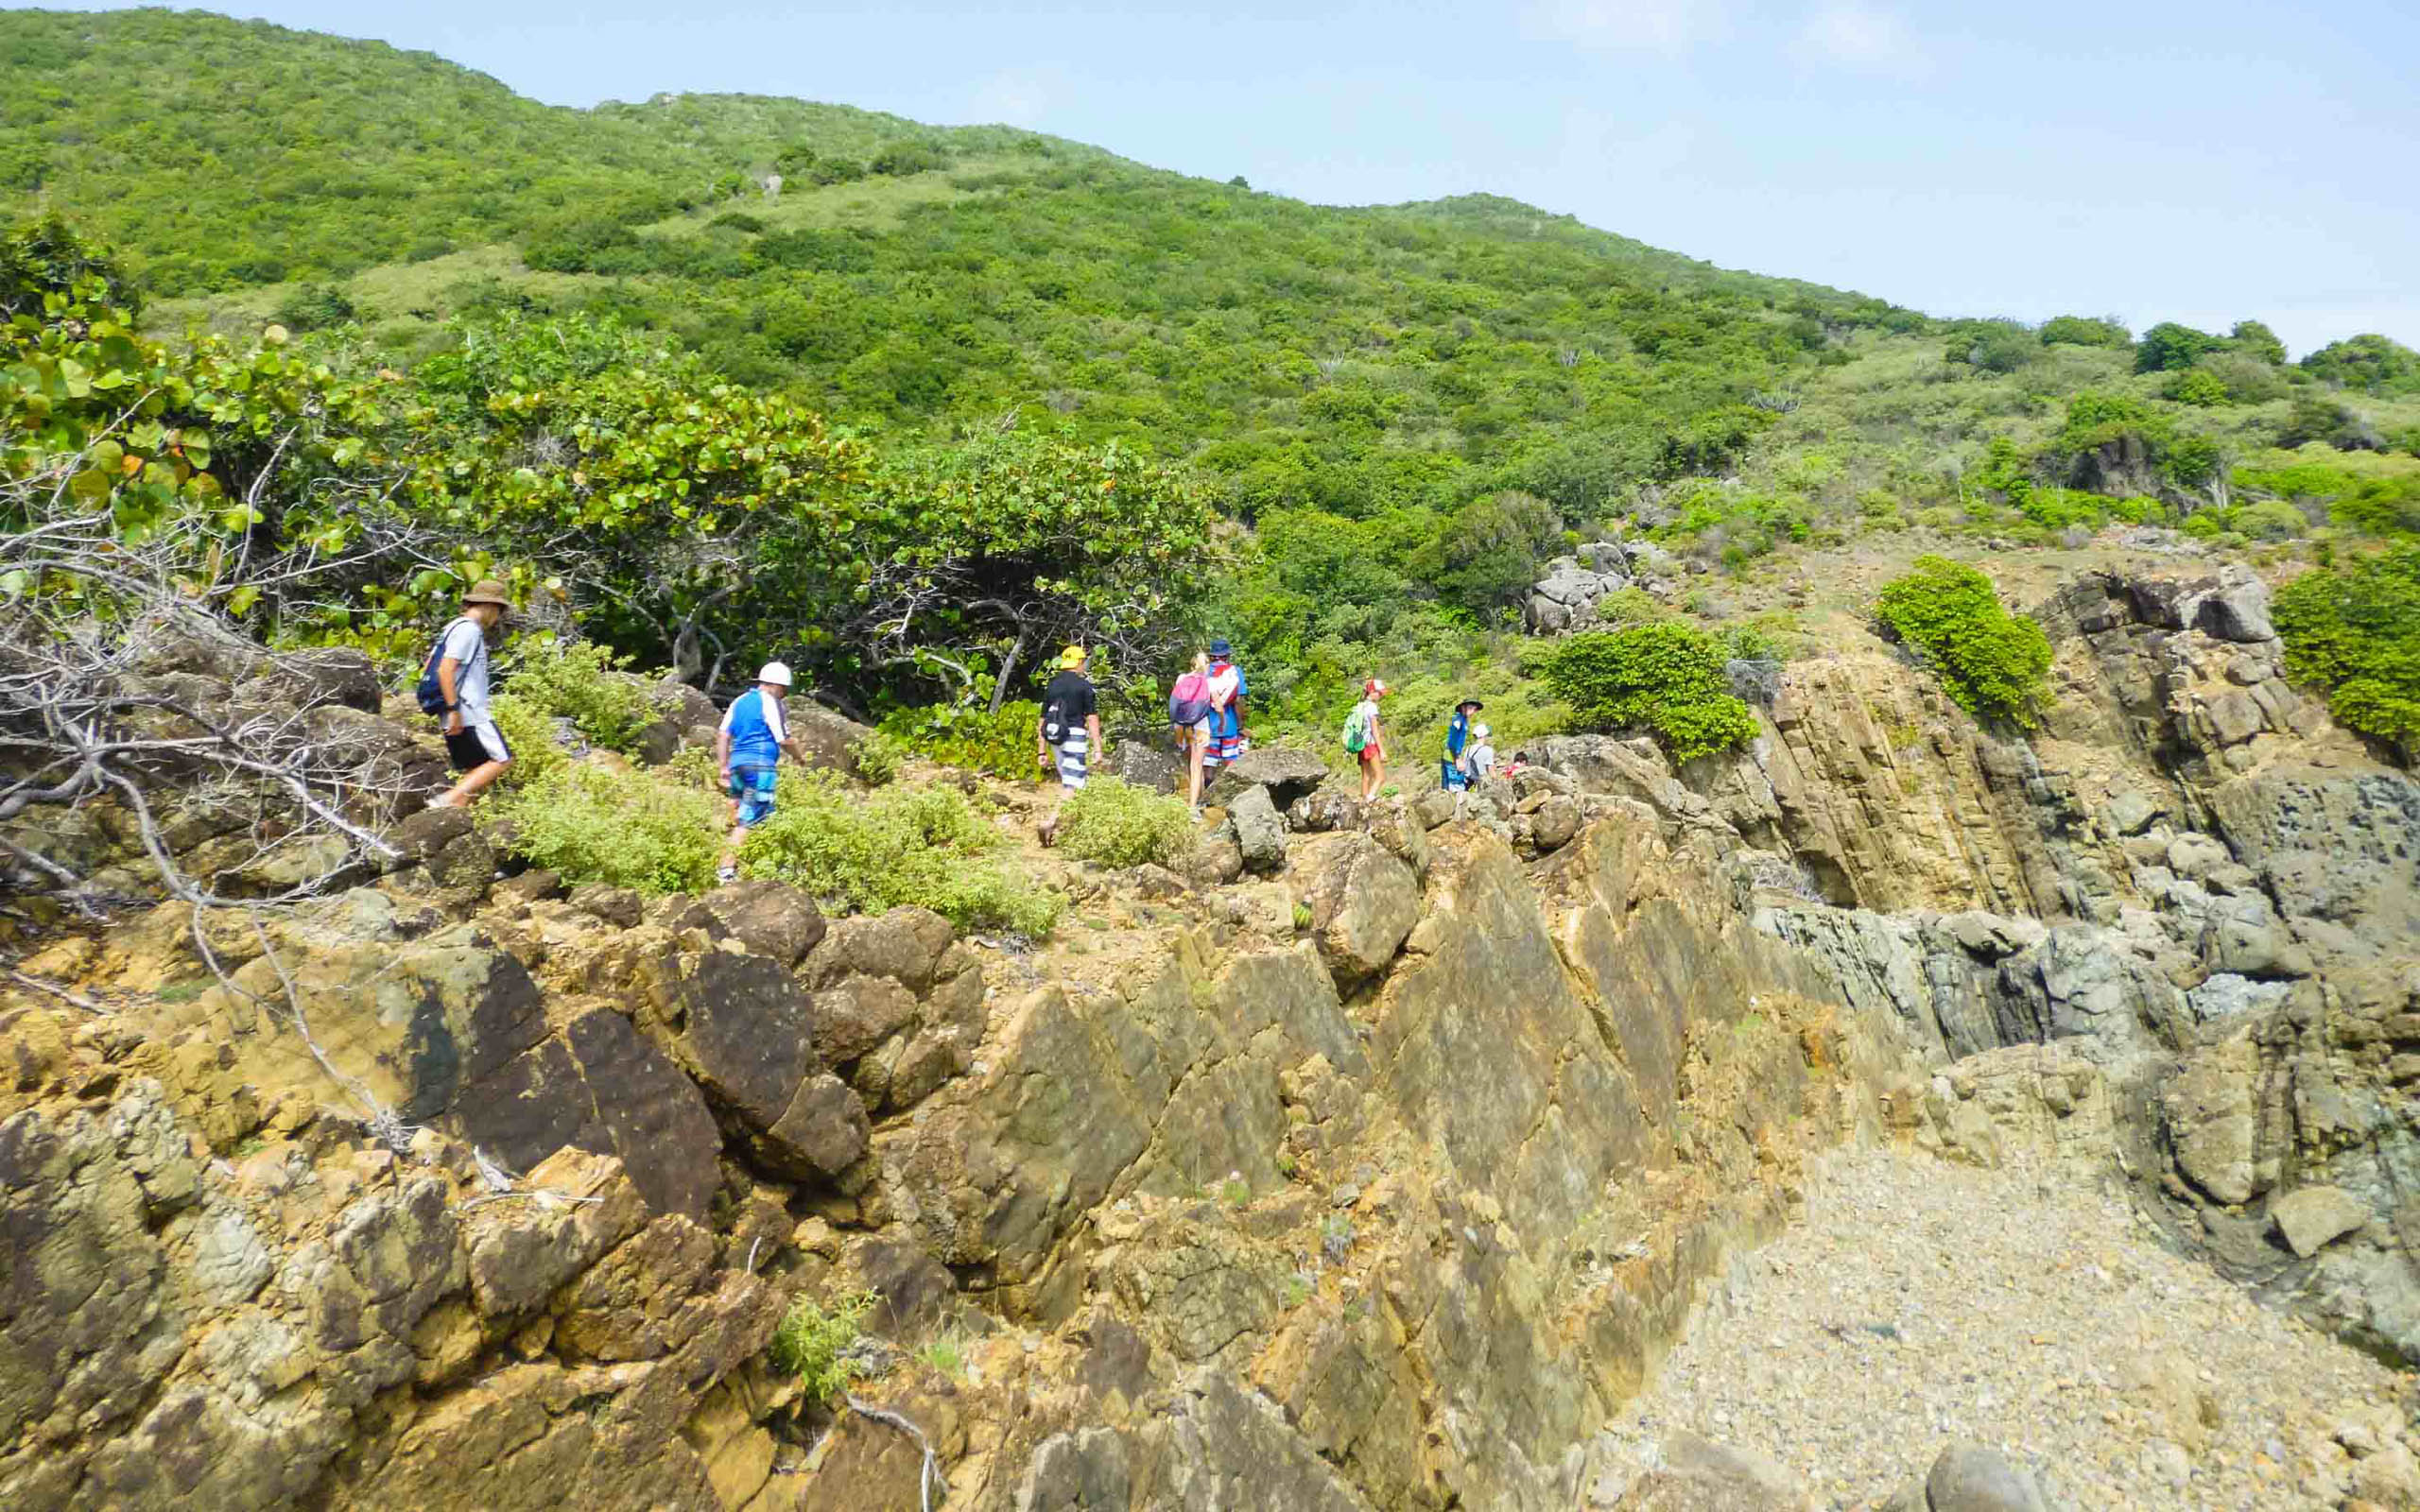 A group of people walking on a rocky cliff.